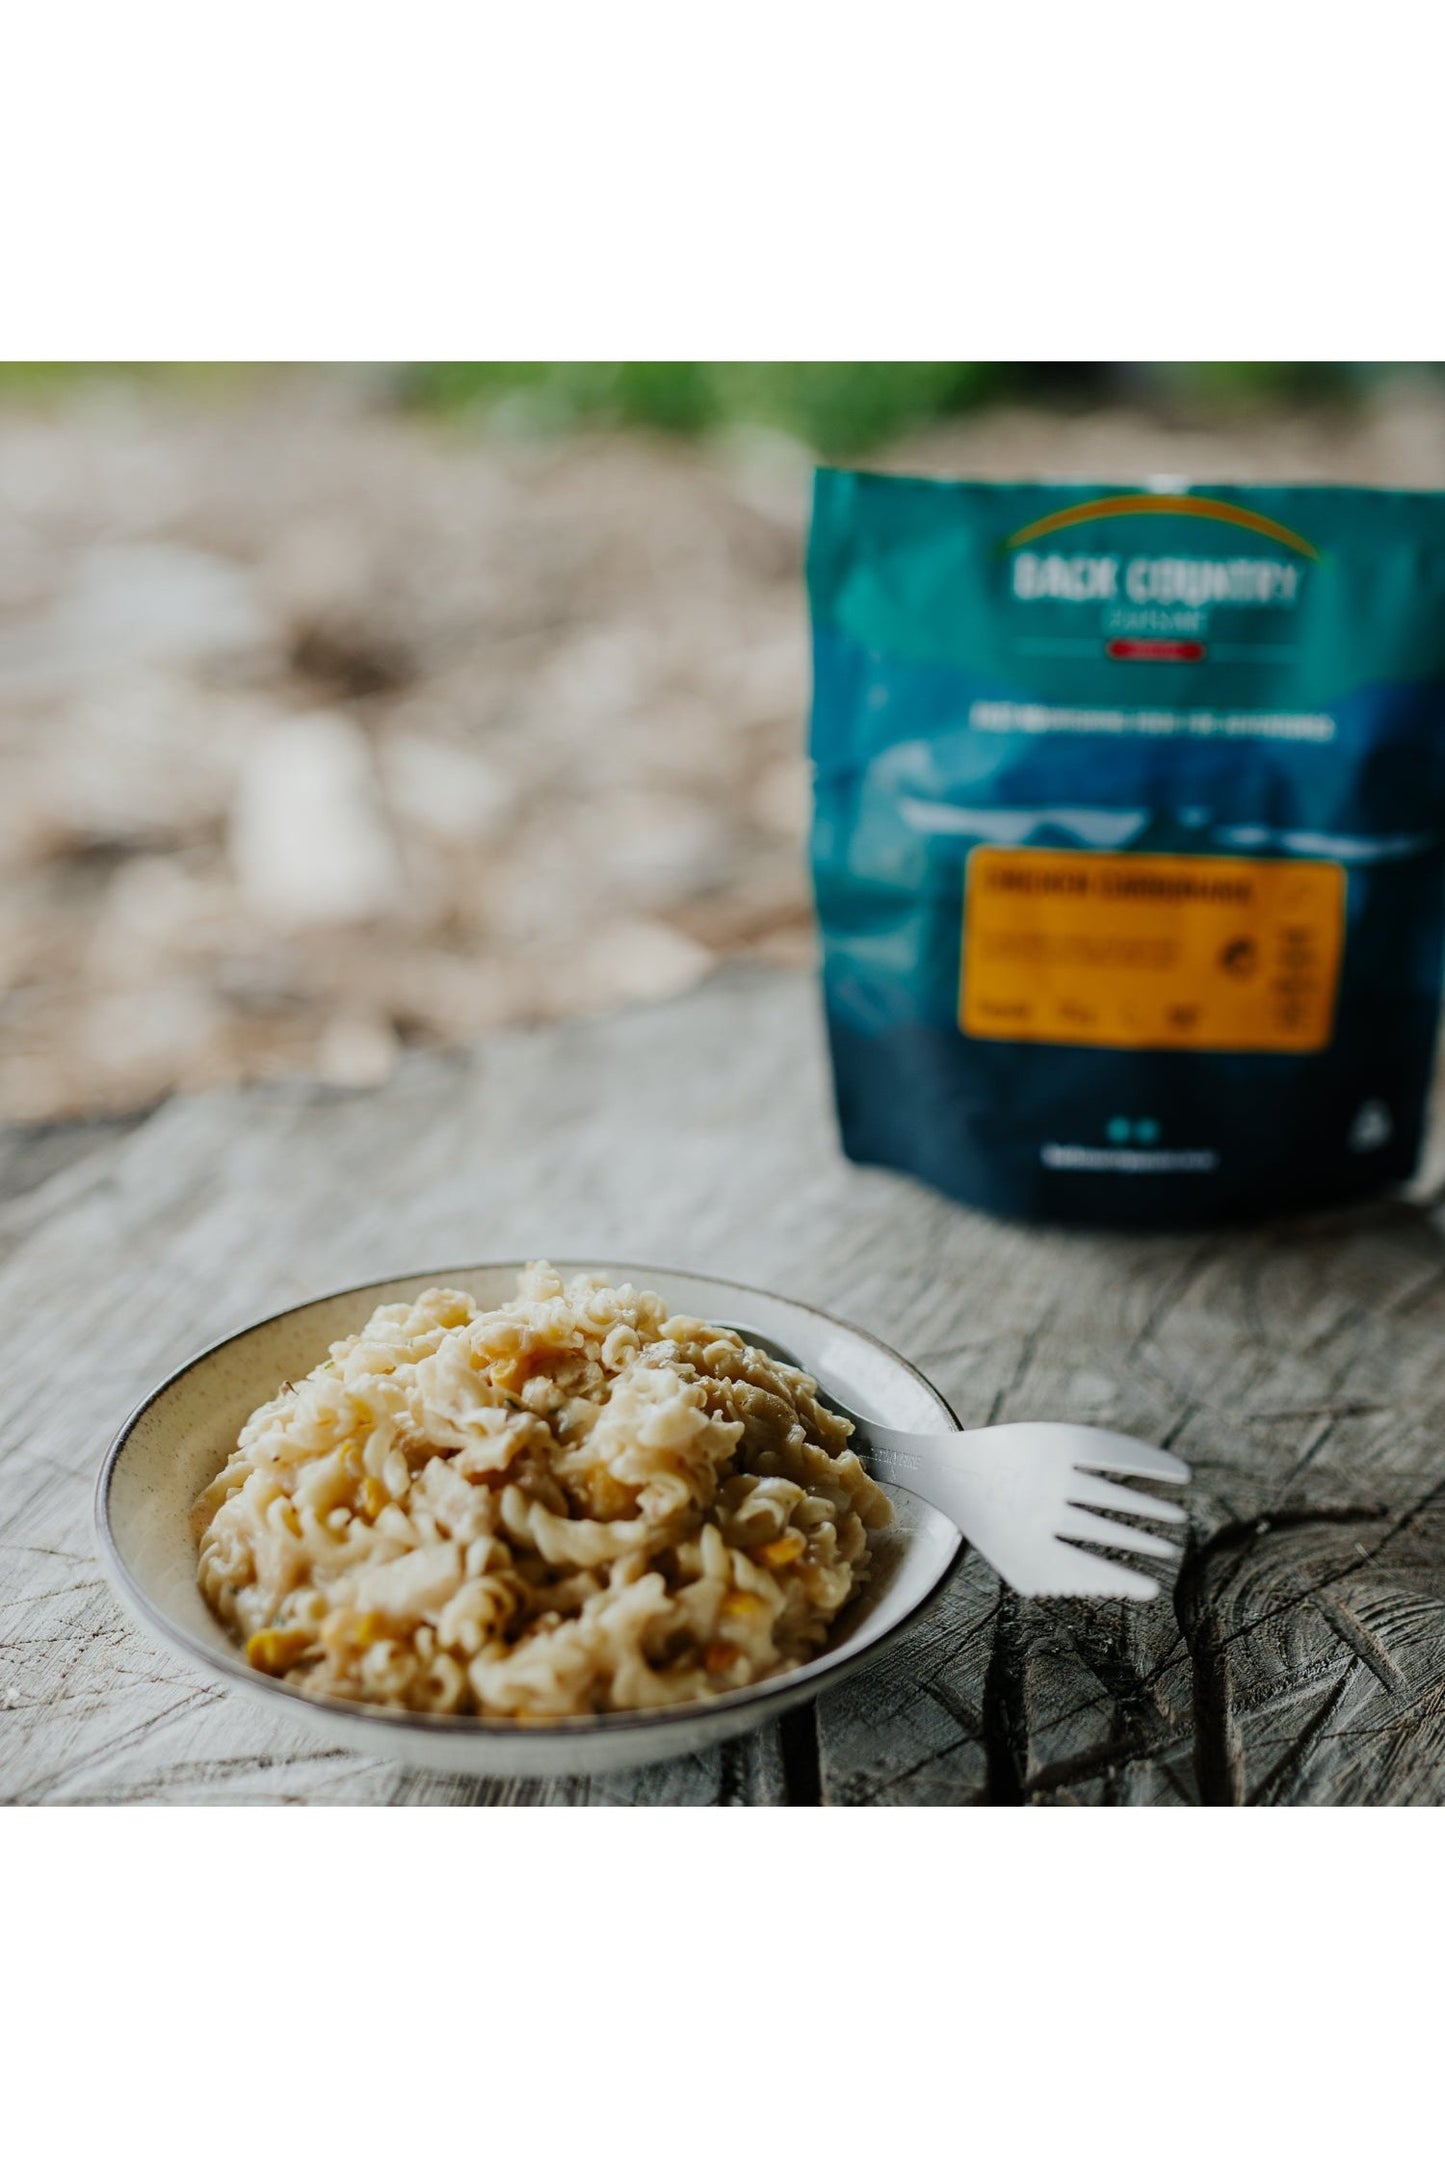 Back Country Cuisine - Chicken Carbonara Back Country Cuisine Rugged Ram Outdoors